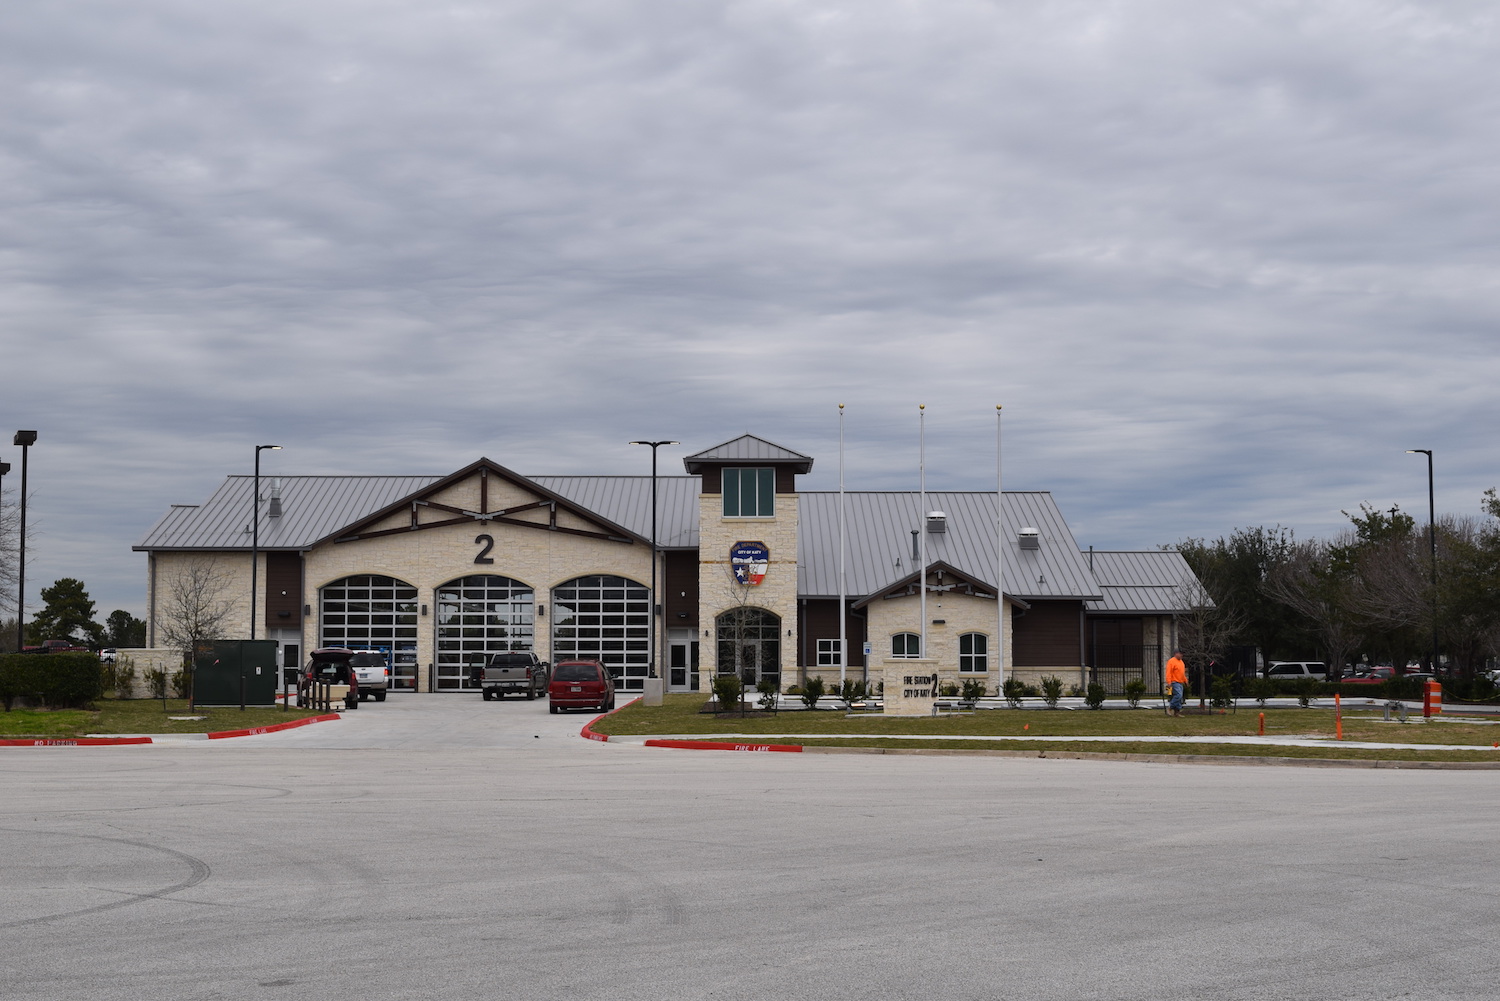 City of Katy hosts grand opening for Fire Station No. 2 just one day before saving drowning child Photo